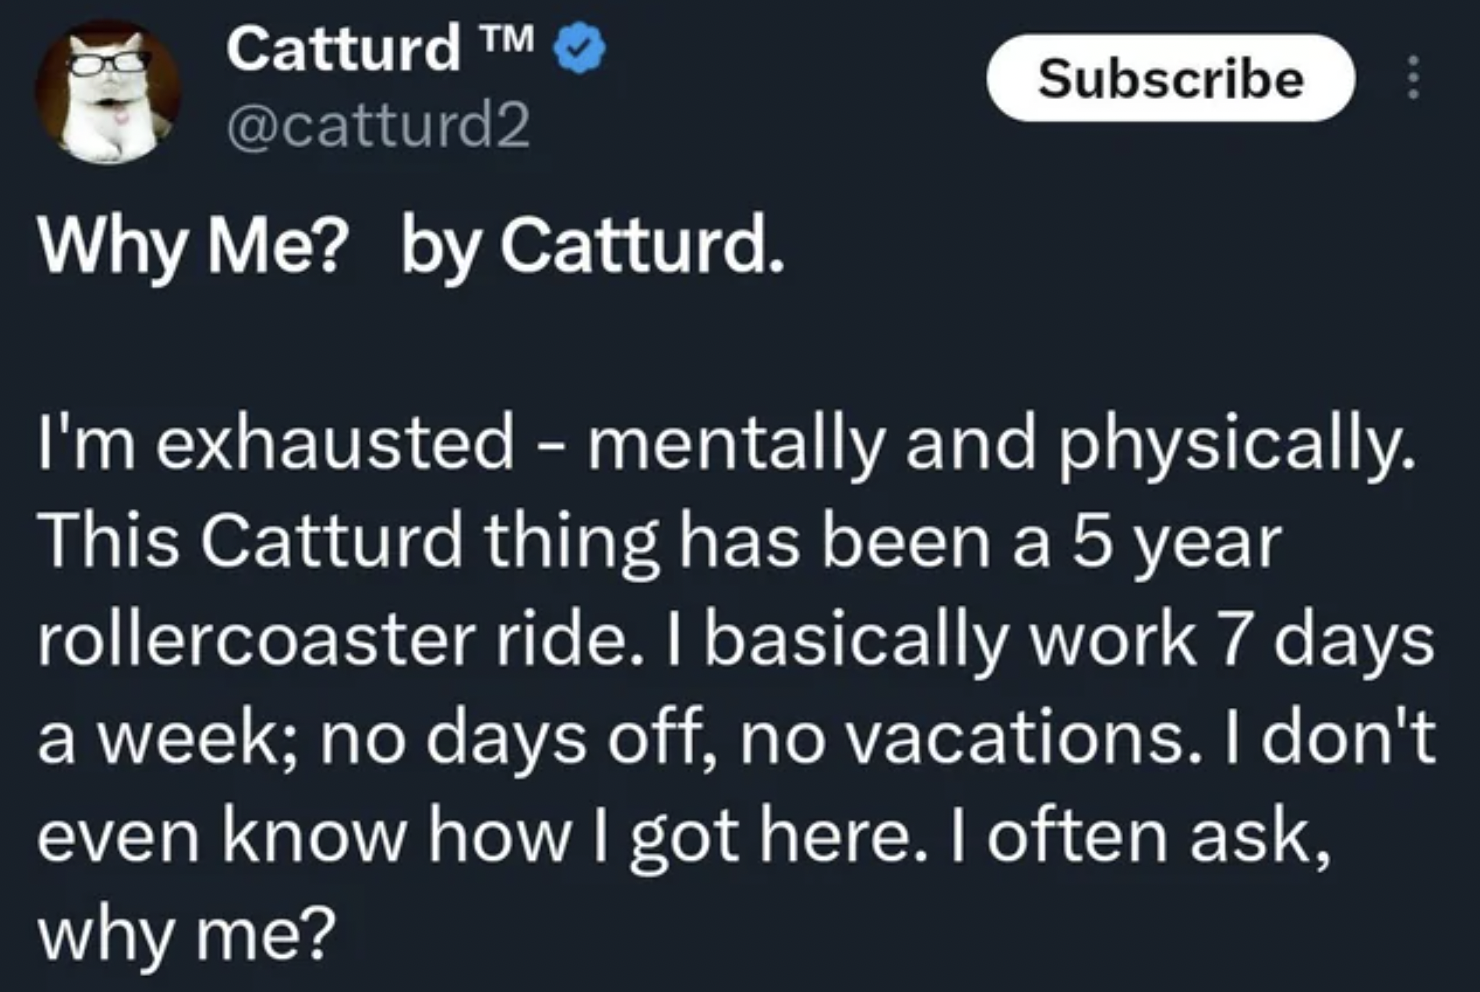 material - Catturd M Why Me? by Catturd. 8 Subscribe I'm exhausted mentally and physically. This Catturd thing has been a 5 year rollercoaster ride. I basically work 7 days a week; no days off, no vacations. I don't even know how I got here. I often ask,